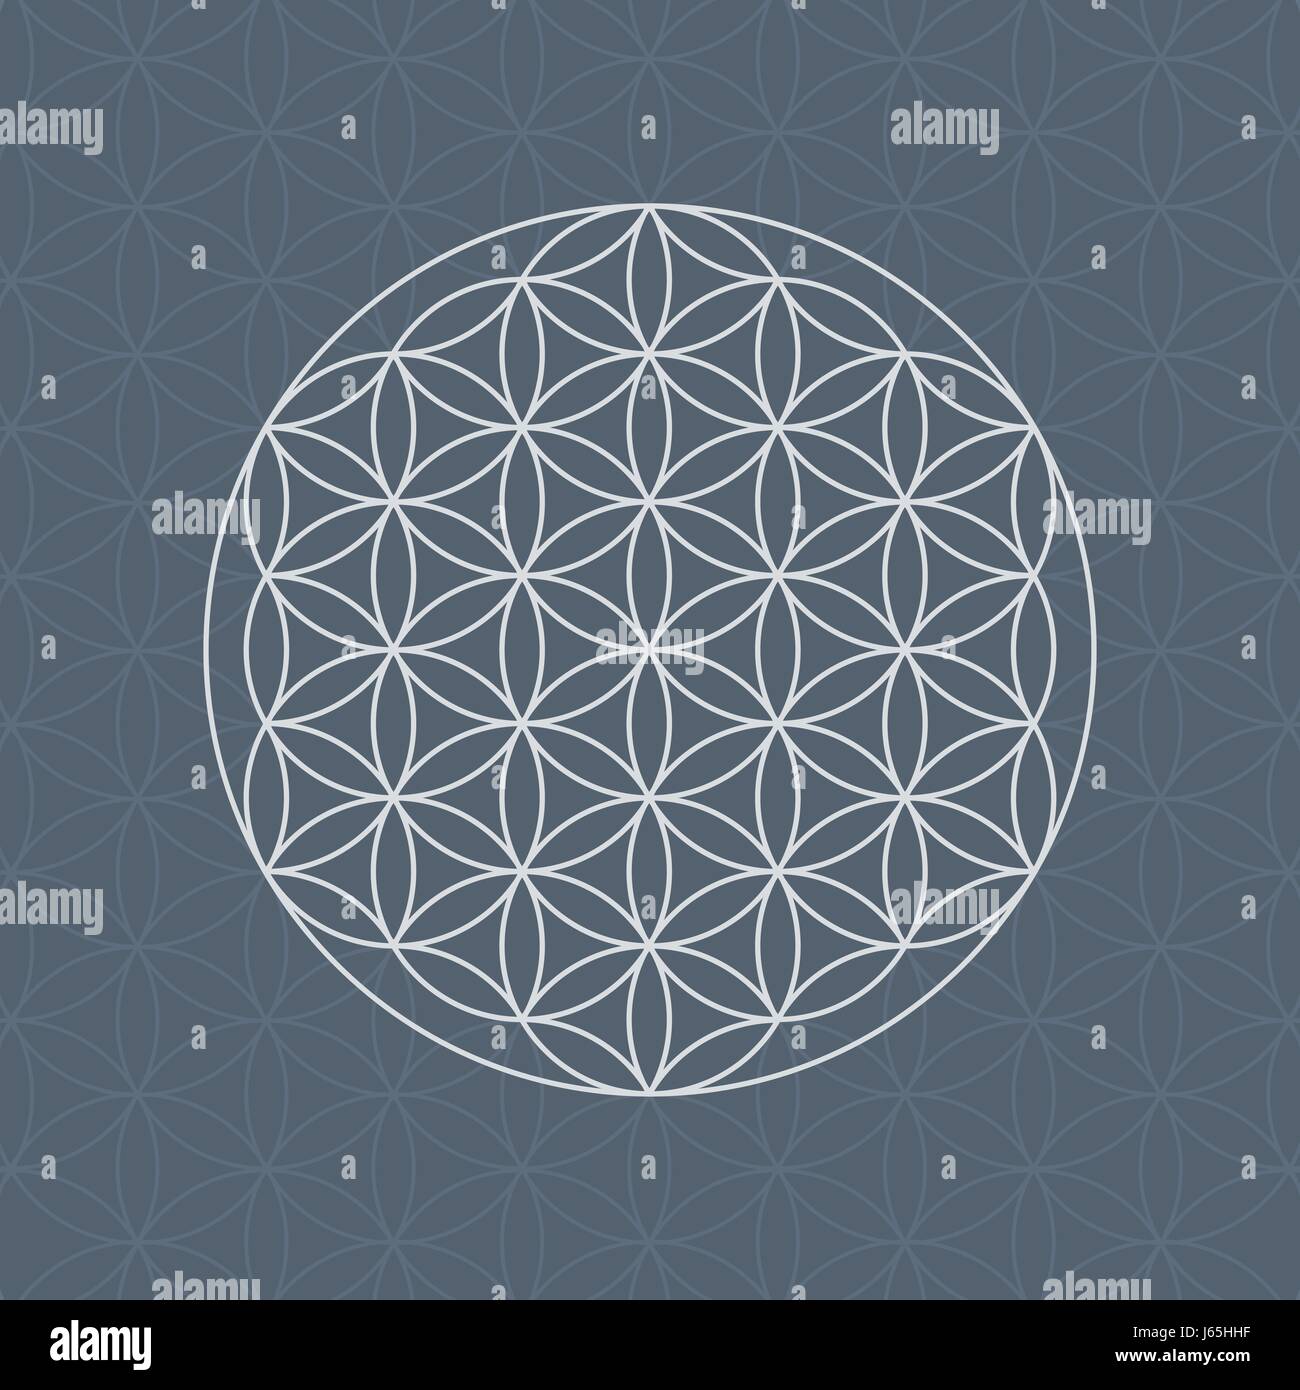 Flower of life sacred geometry pattern with overlapping circles Stock Vector